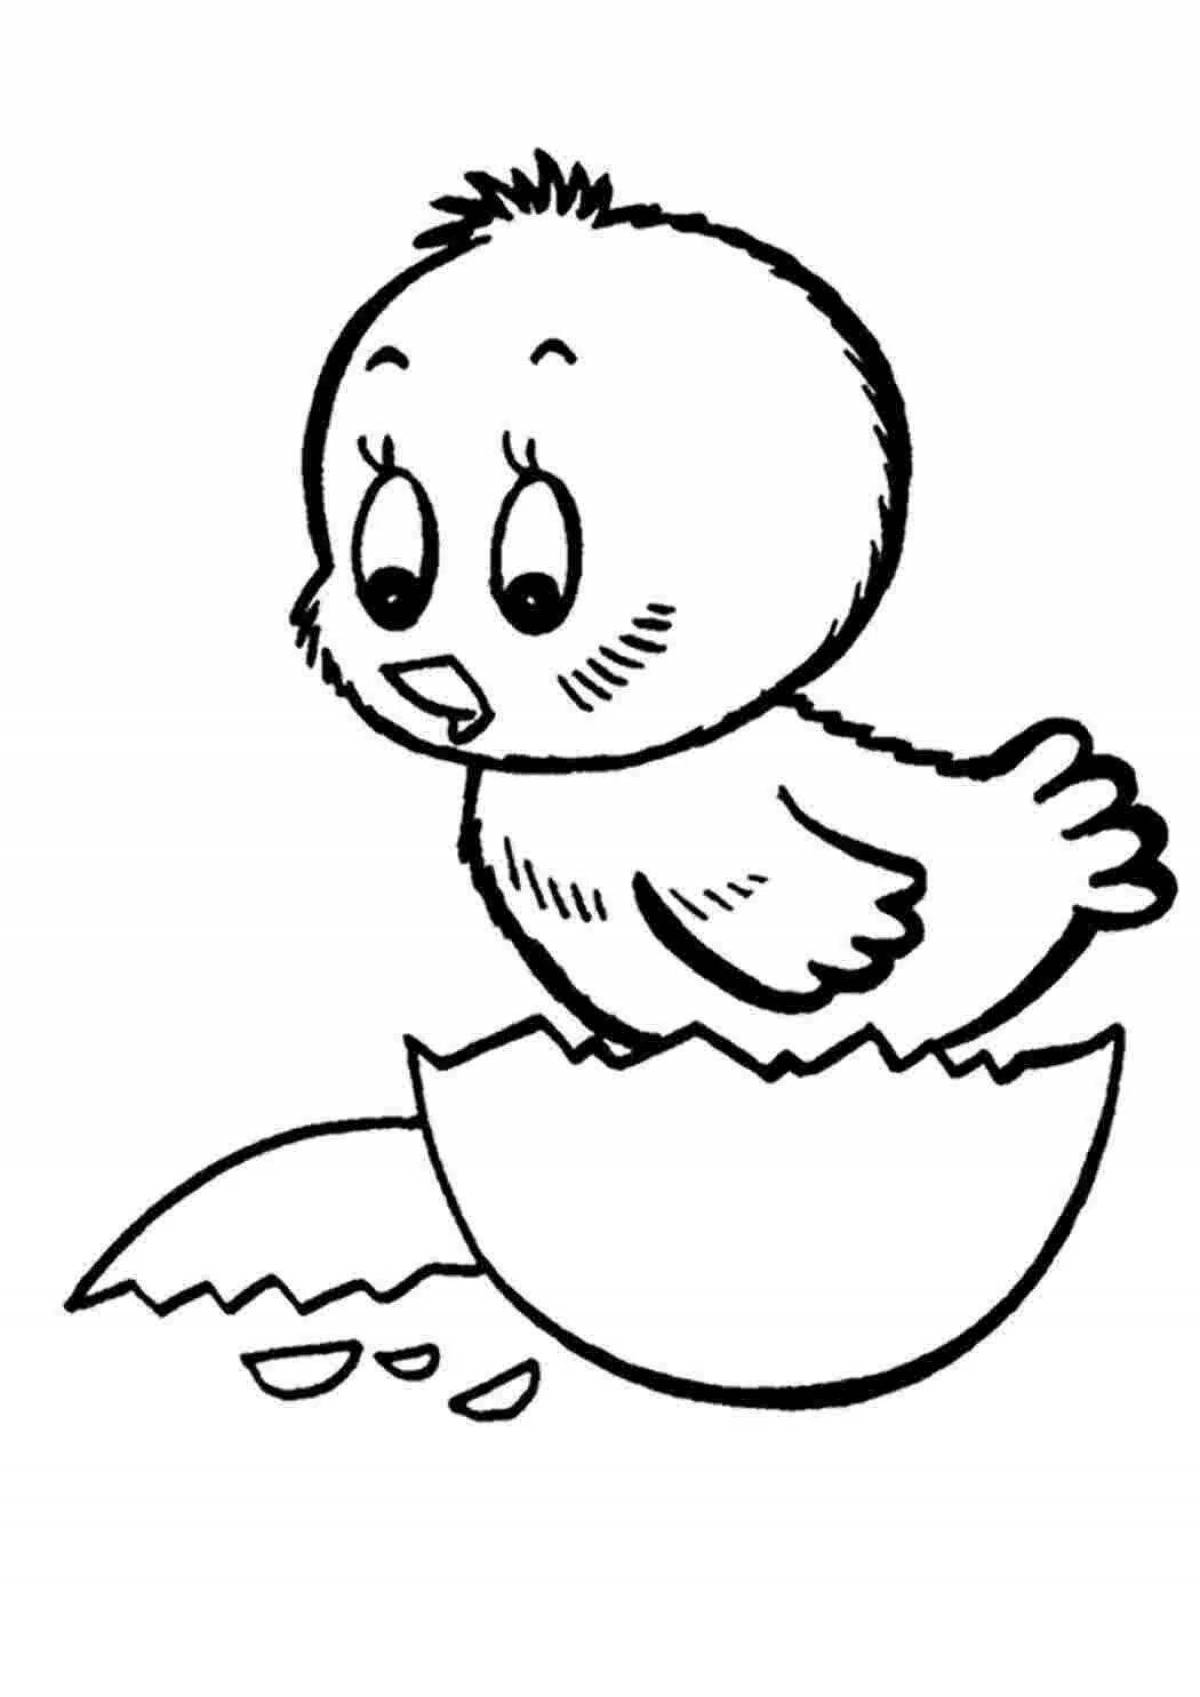 Coloring page fancy hen in egg